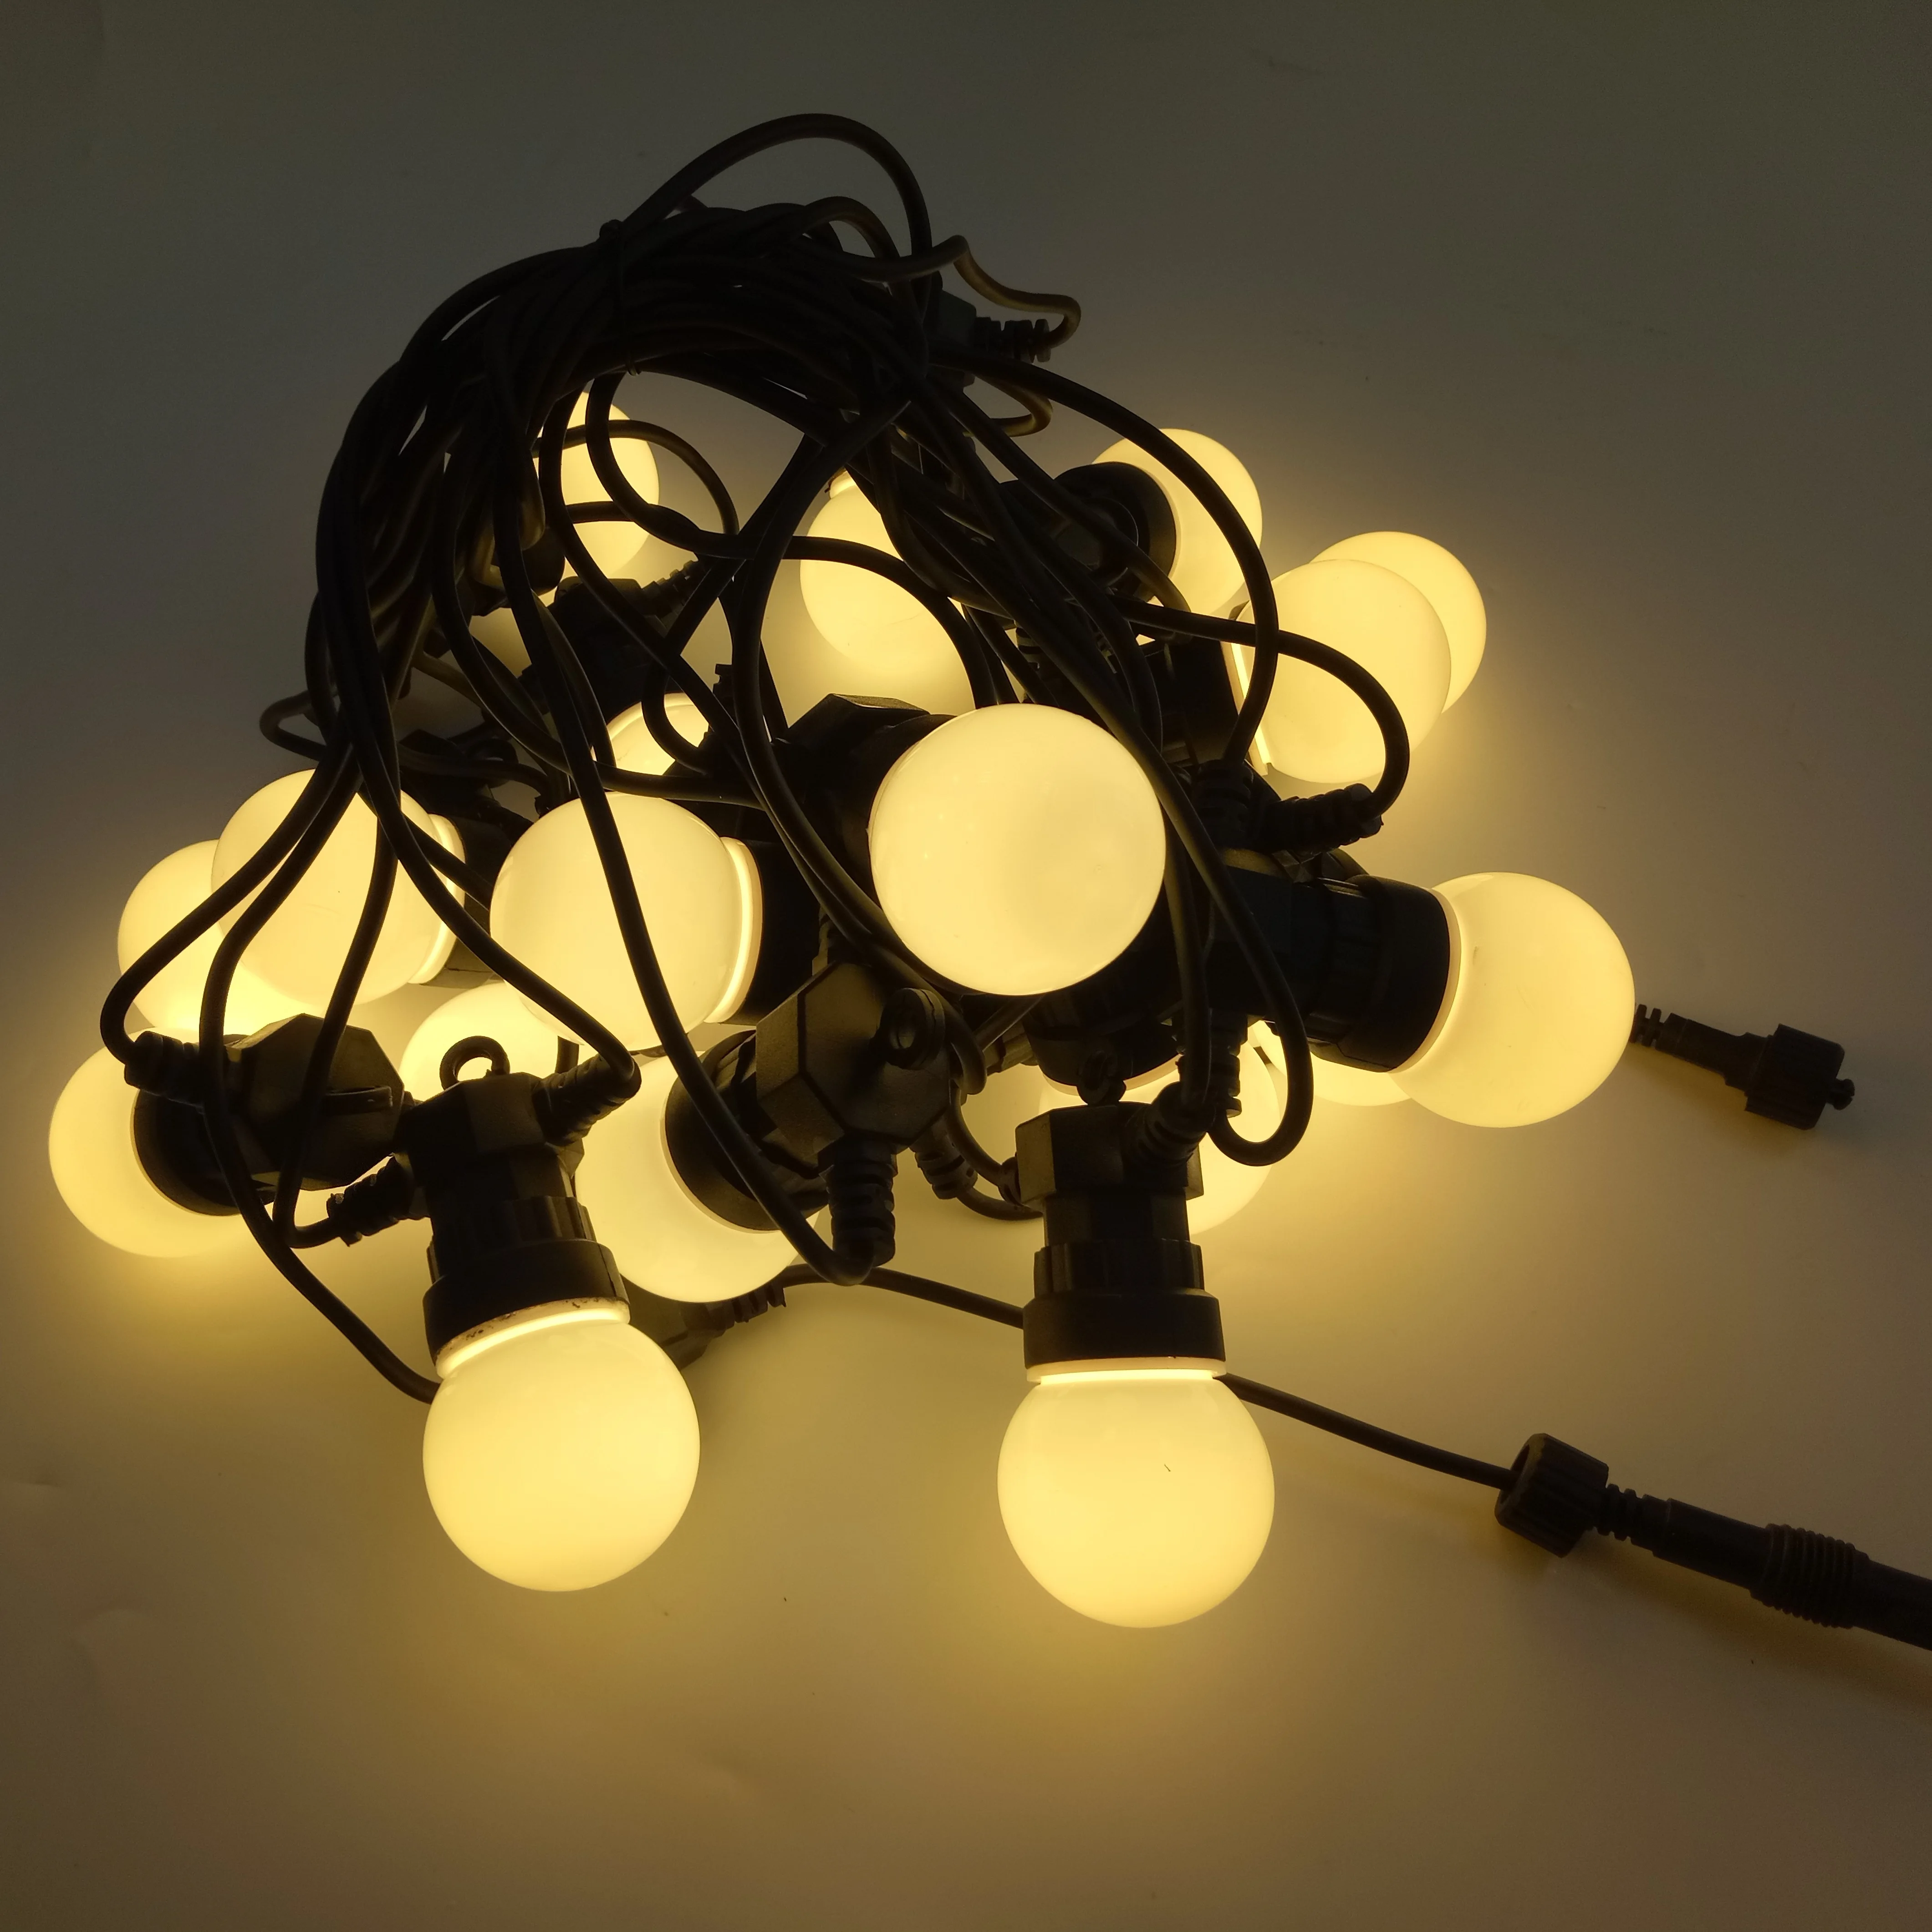 10m Connectable Garden Garland Black Rubber Wire Golfball String Holiday Outdoor Patio Lights G50 Led Light Chain